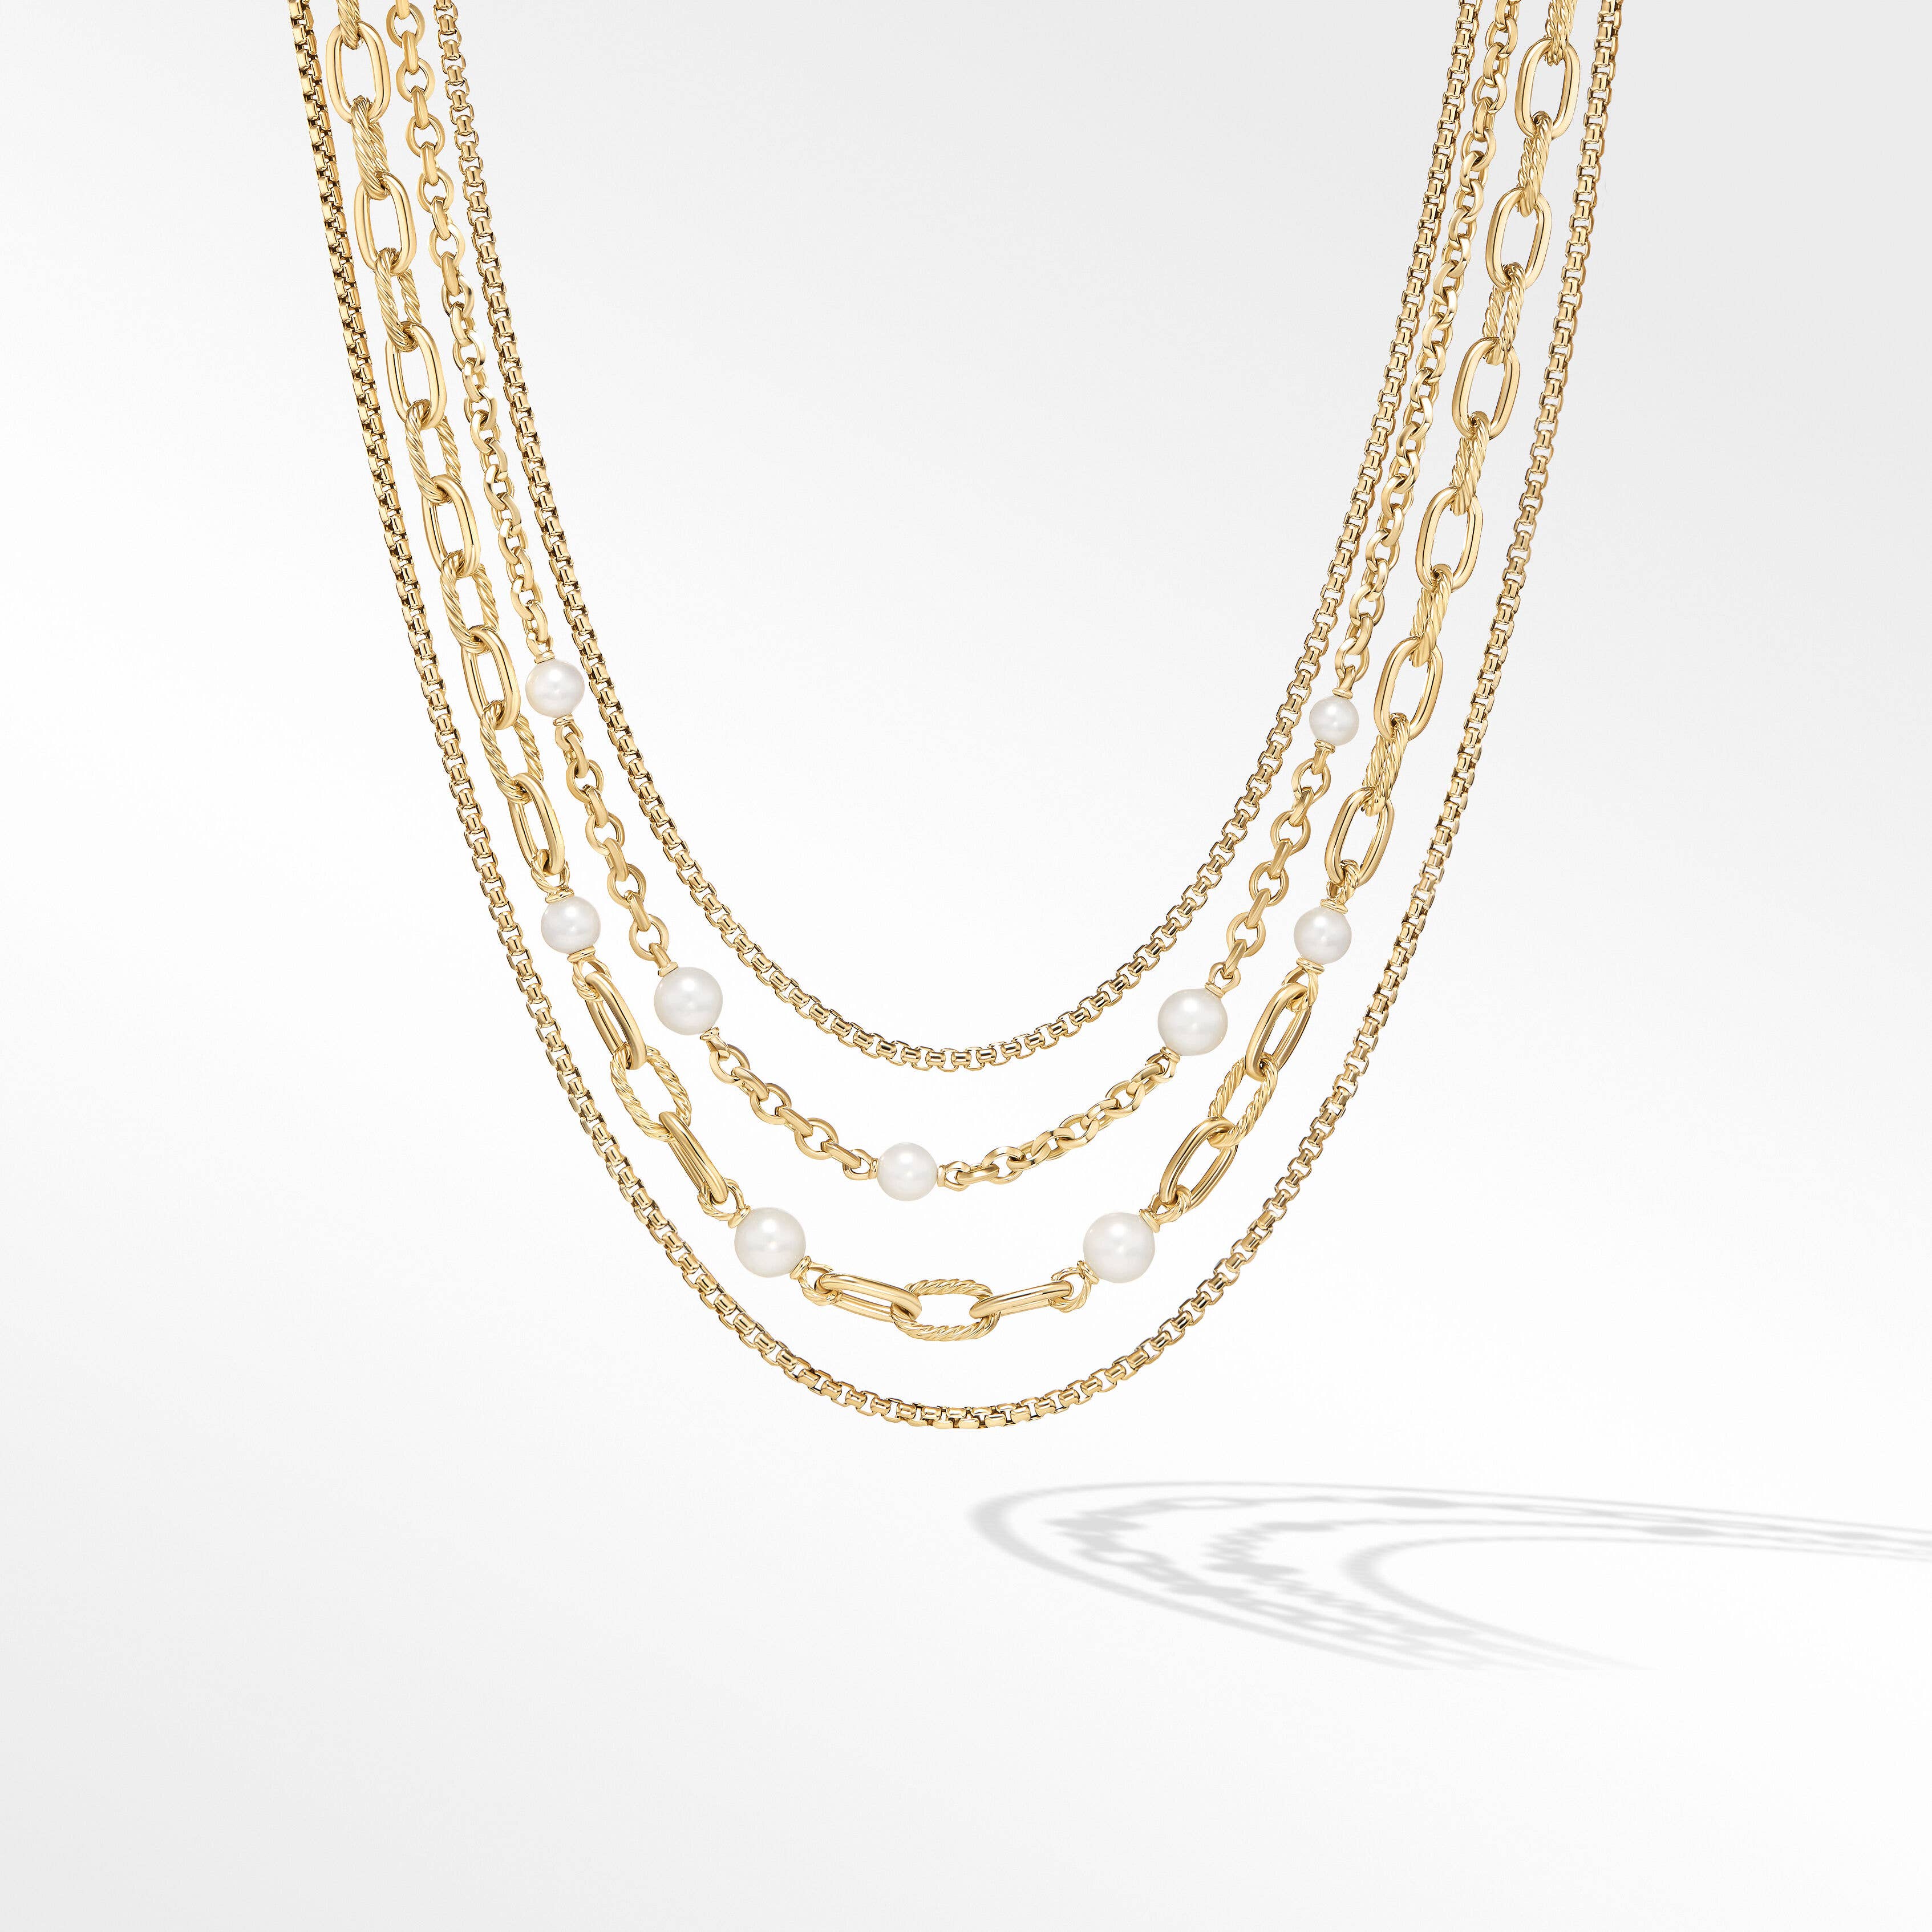 DY Madison Pearl Multi Row Chain Necklace in 18K Yellow Gold